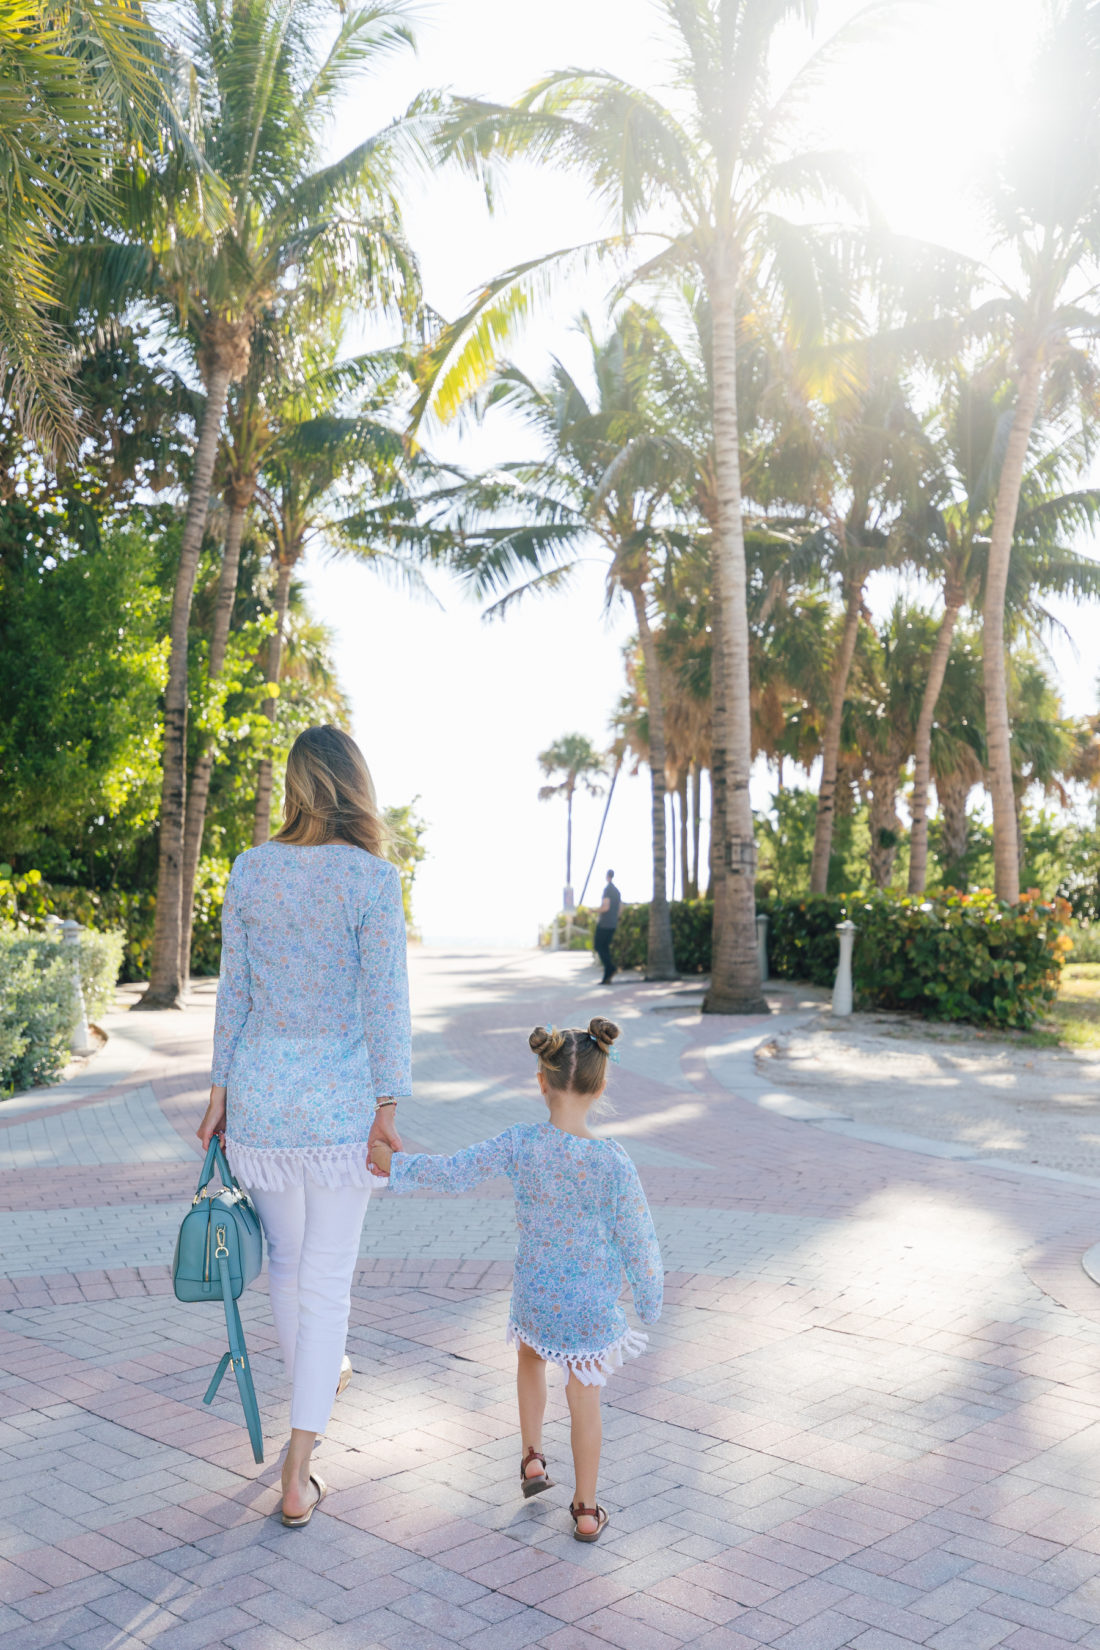 Eva Amurri Martino and Marlowe Martino walk together towards the beach in Miami wearing matching floral fringe tunics from the Happily. Eva After x Masala Baby capsule collection